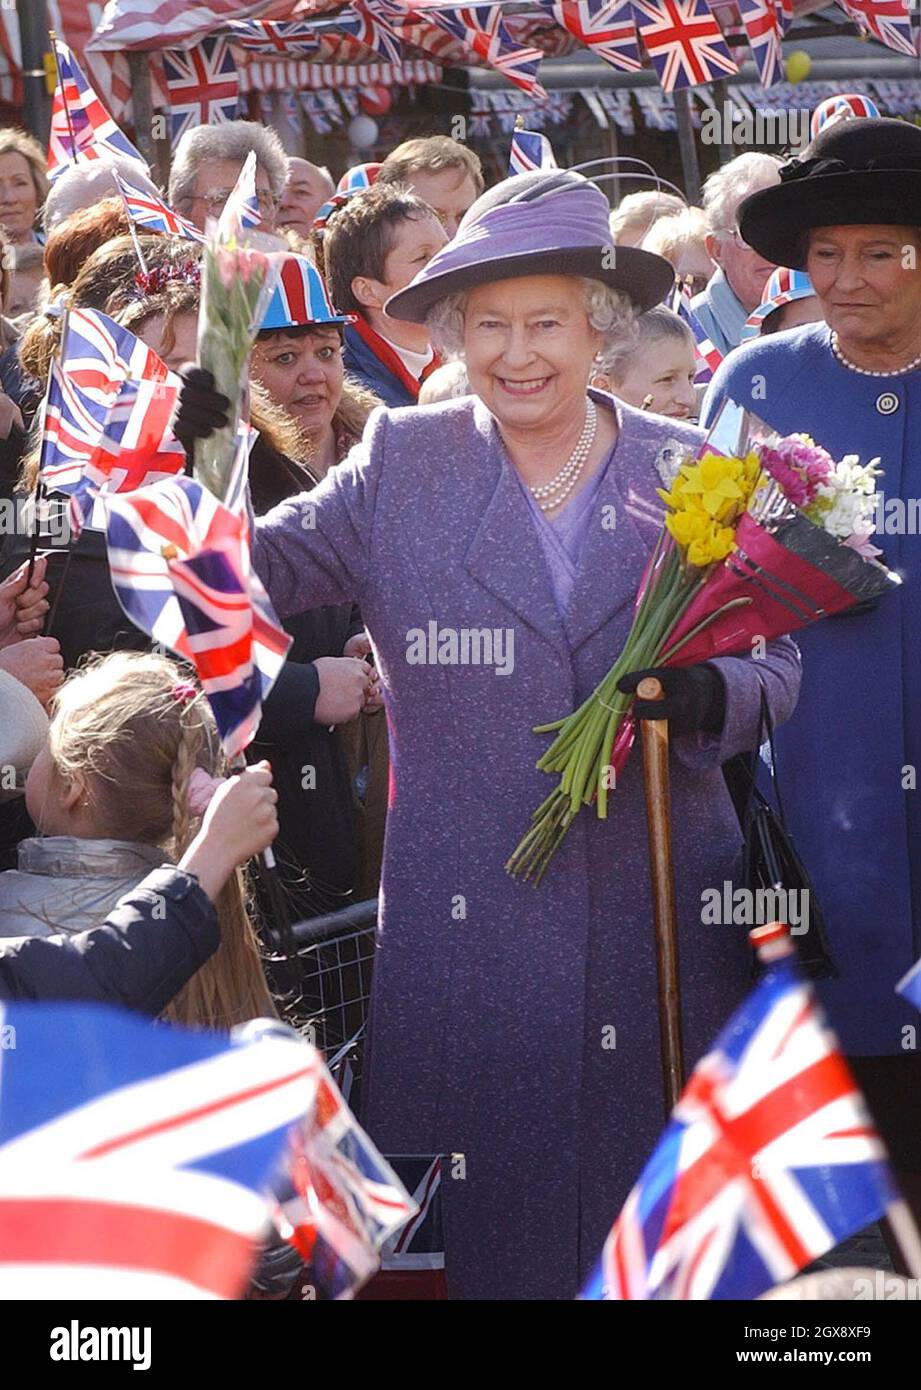 The Queen meets well wishers during a walkabout in the market square, Romford, Thursday March 6, 2003. The Queen, who has travelled the globe visiting some of the world's most famous destinations, has never before visited the area, famous for Cockney rhyming slang and its East End connections.  Three quarter length, royals, hat, flowers, union jack.  Â©Anwar Hussein/allaction.co.uk  Stock Photo